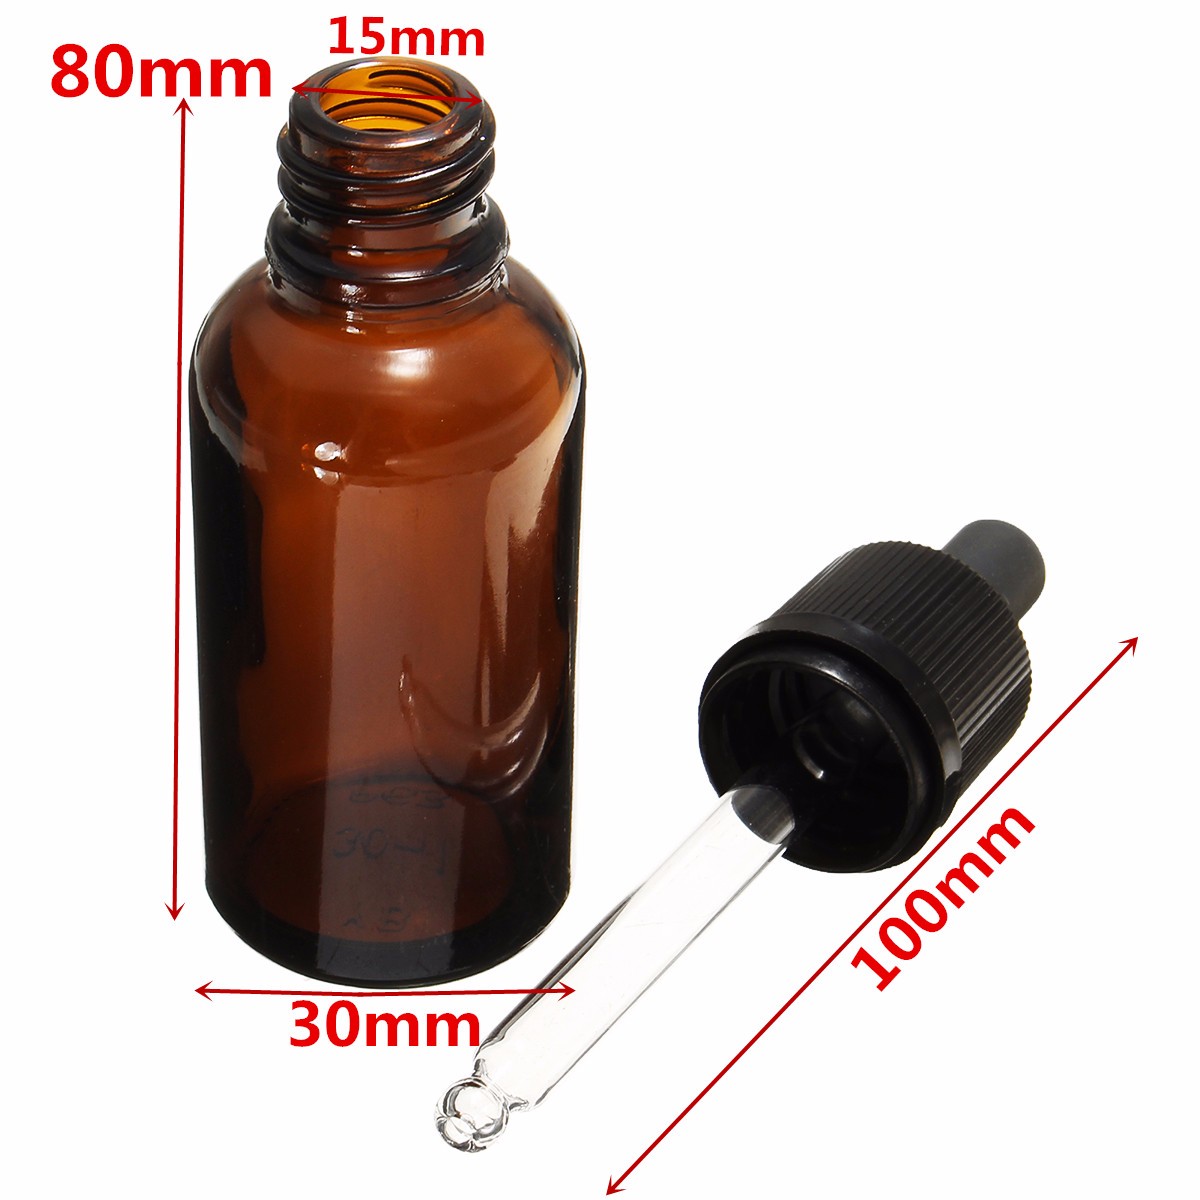 30ml-Empty-Essential-Oil-Refillable-Bottles-Amber-Glass-Dropper-Travel-Vials-Makeup-Skin-Care-Tools-1140063